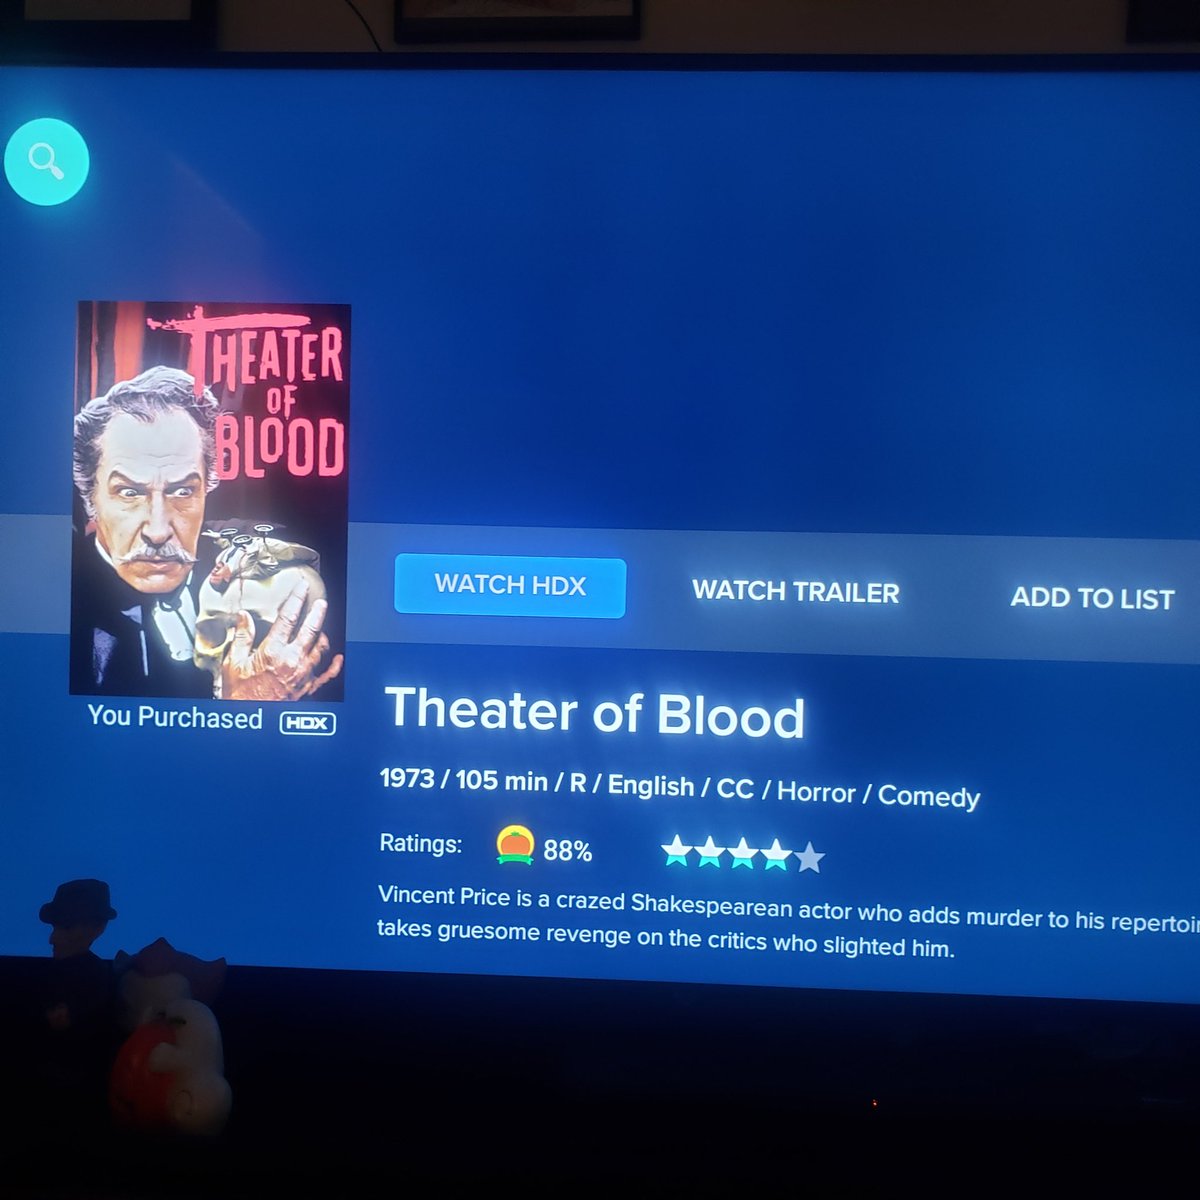 With all the bloodbath going on in the news today, I'm thinking its a good time to watch Theater of Blood starring the iconic legend of horror, Vincent Price. 
#NowWatching #TheaterofBlood #VincentPrice